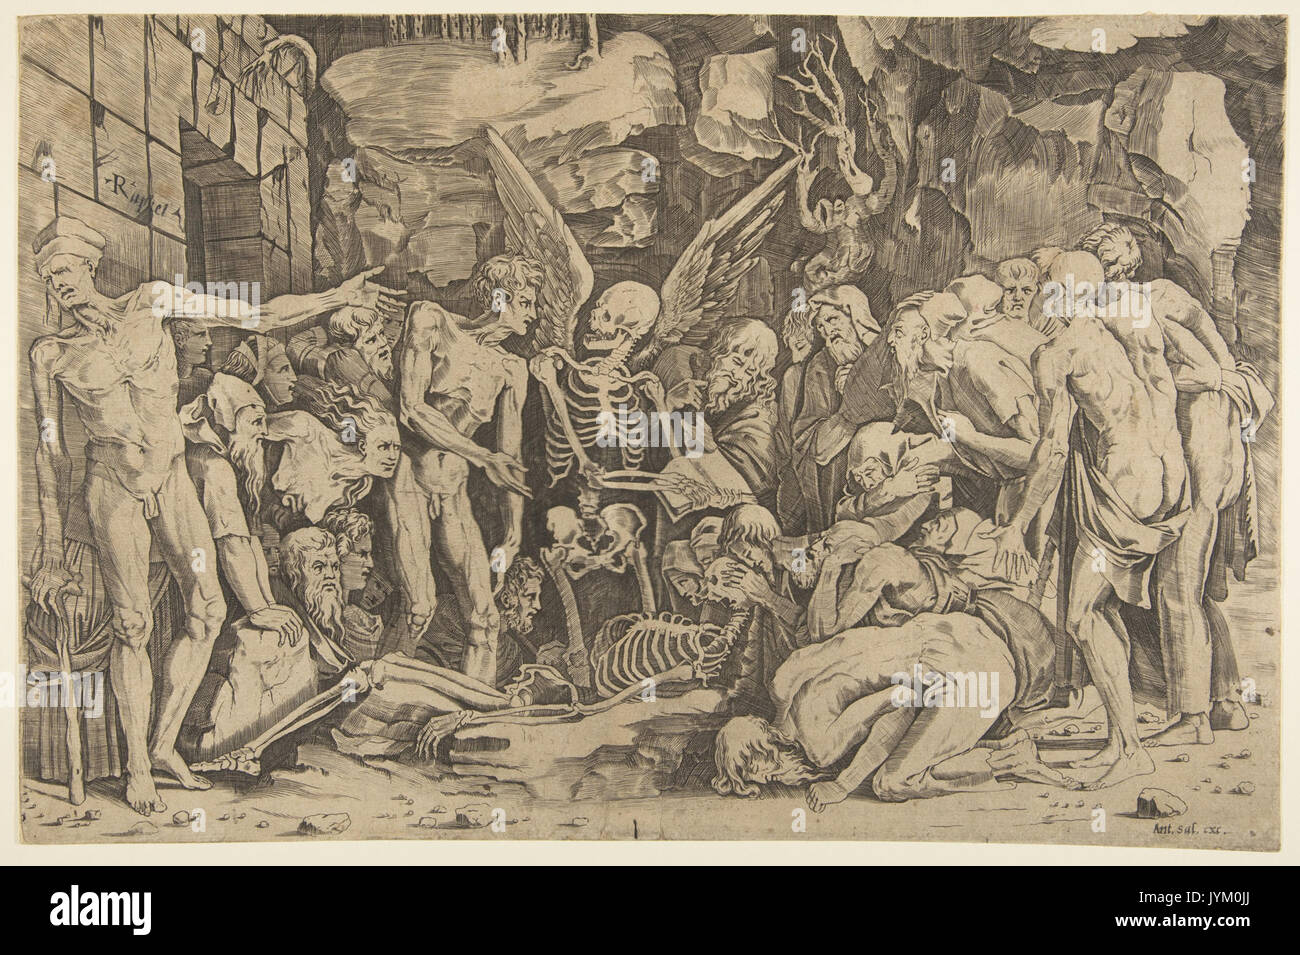 A group of emaciated men and women gathered around a skeleton laid on the ground and a figure of Death as a winged skeleton standing above it holding an open book MET DP818698 Stock Photo